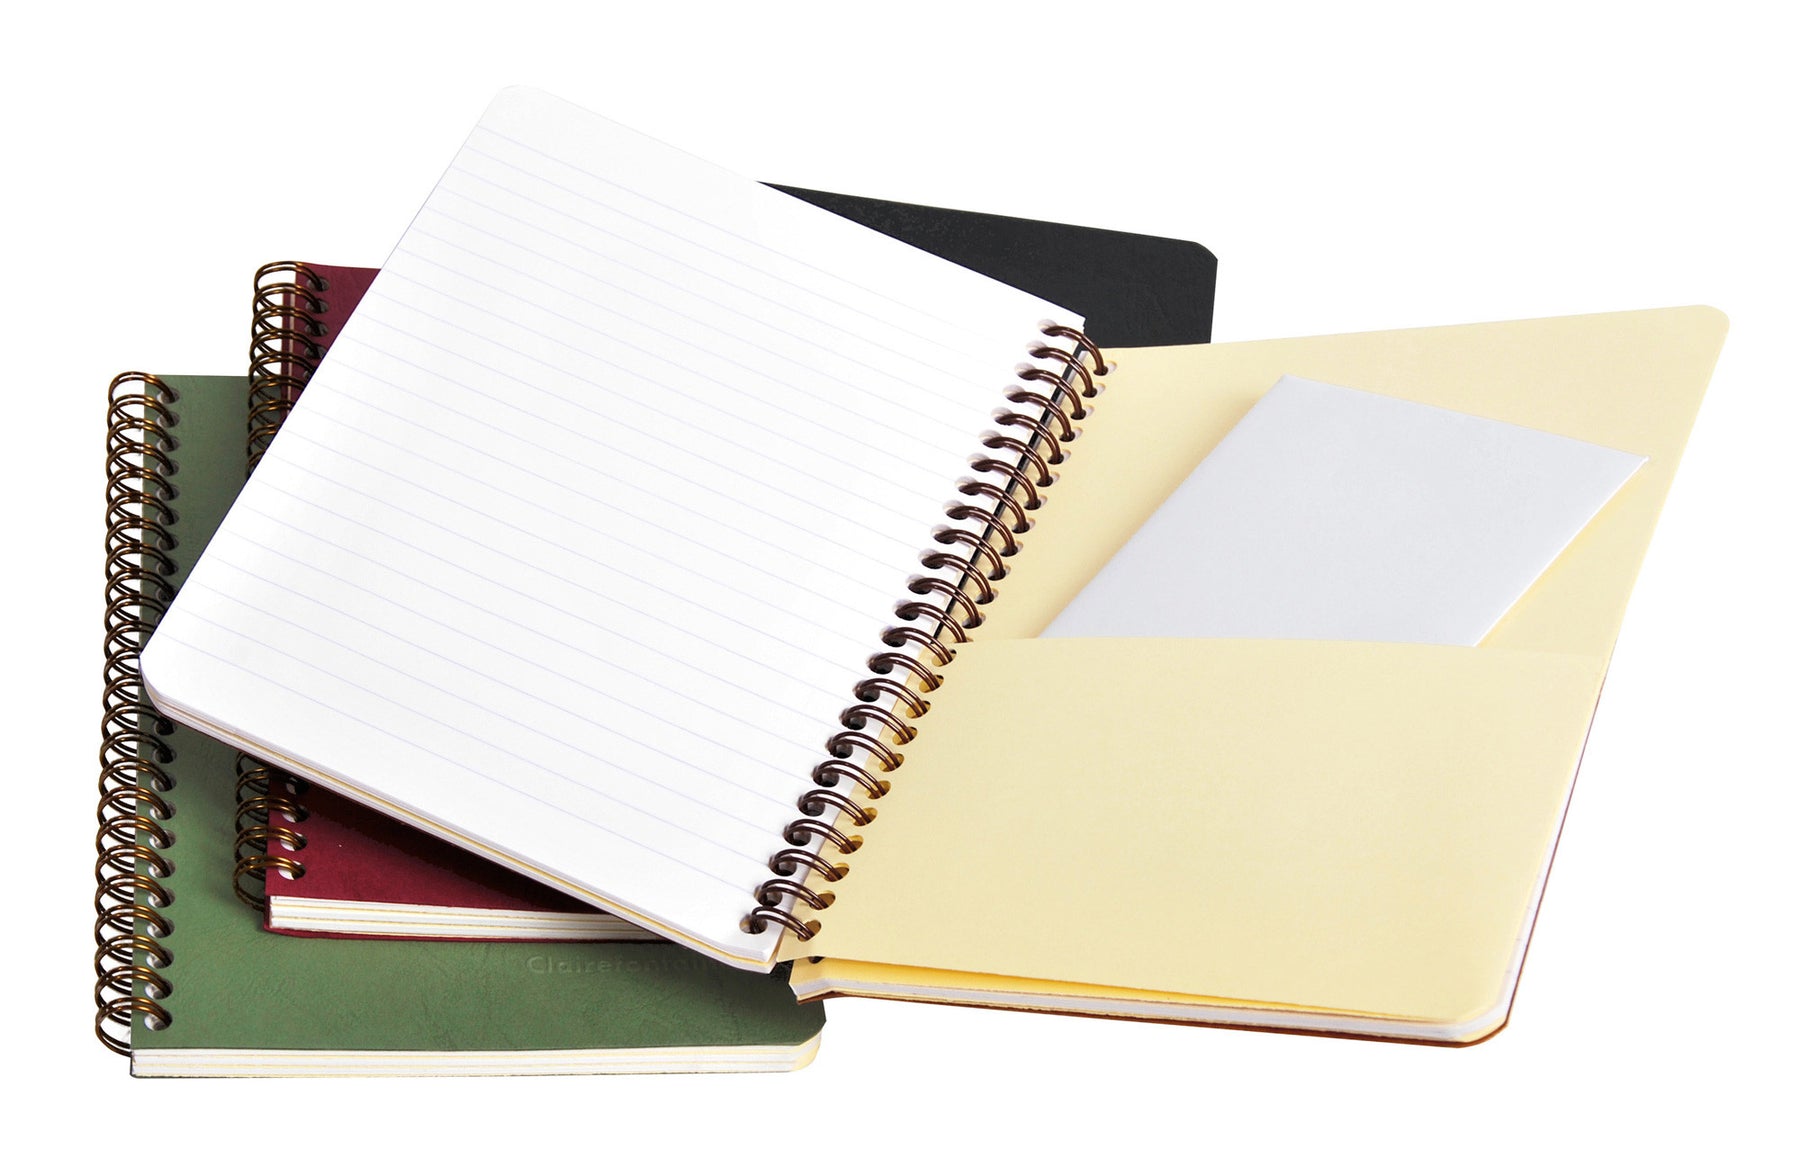 Clairefontaine Basics A5 Side Wirebound Notebook- Tan, Lined